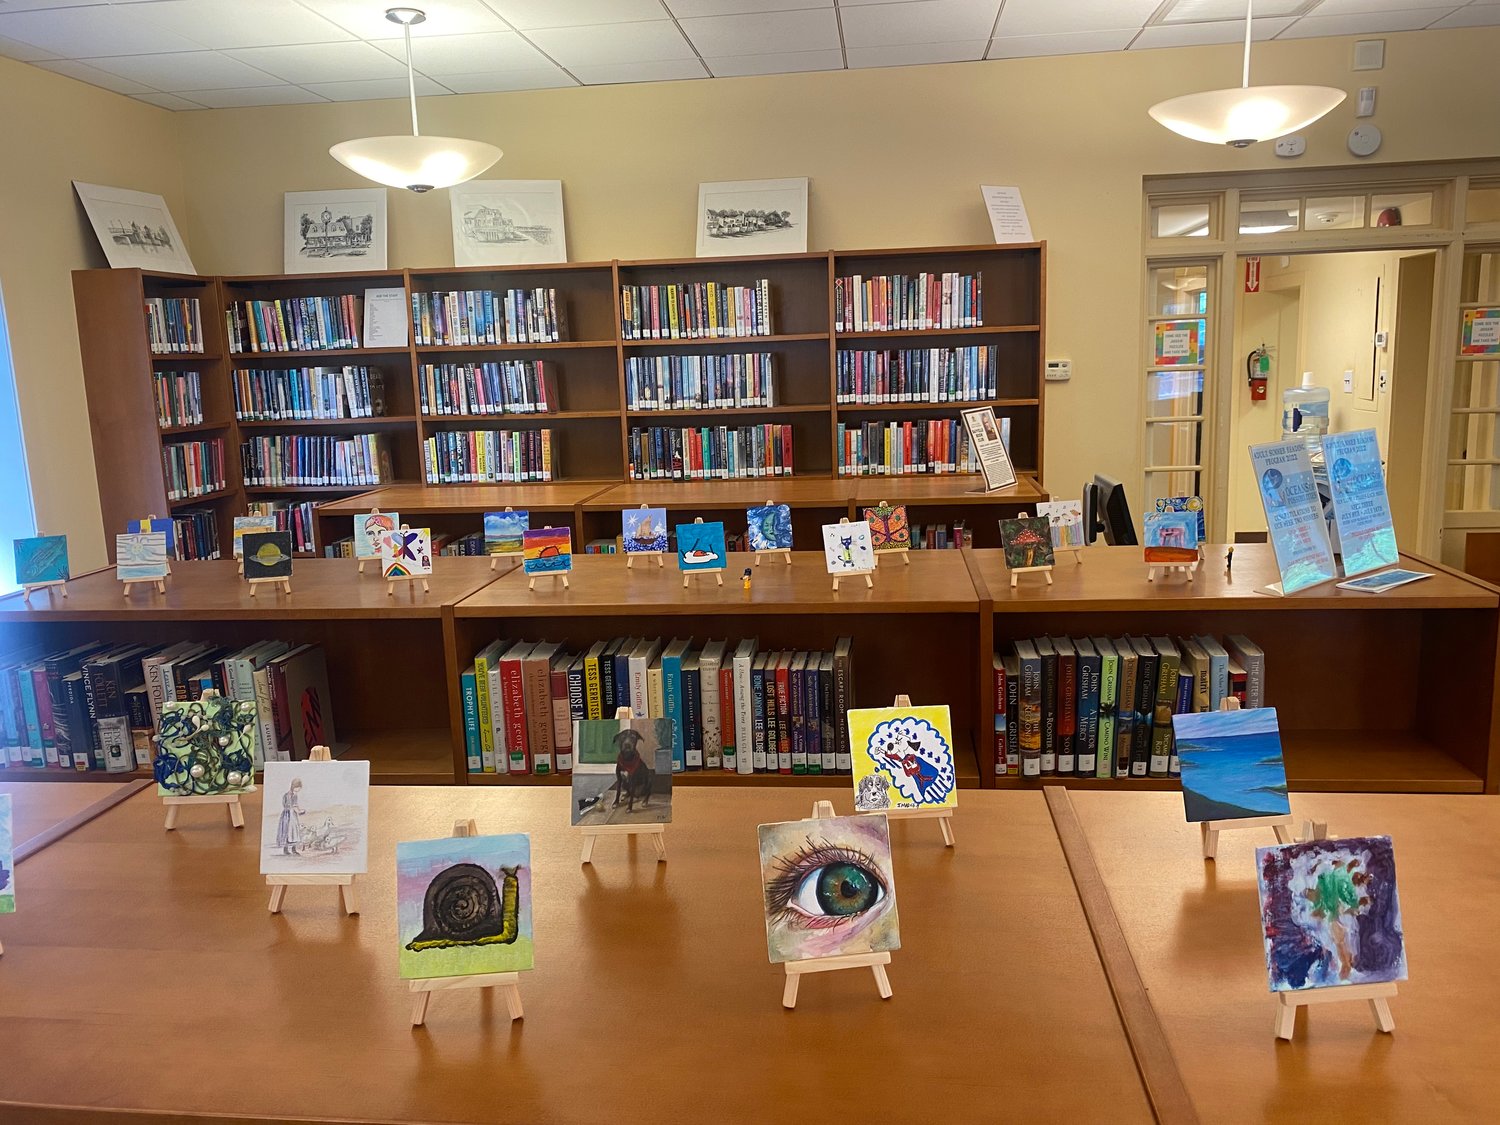 The artwork from the Tiny Art Show created by children, teenagers and adults is on display on top of the bookshelves near the entrance of the Bayville Library.